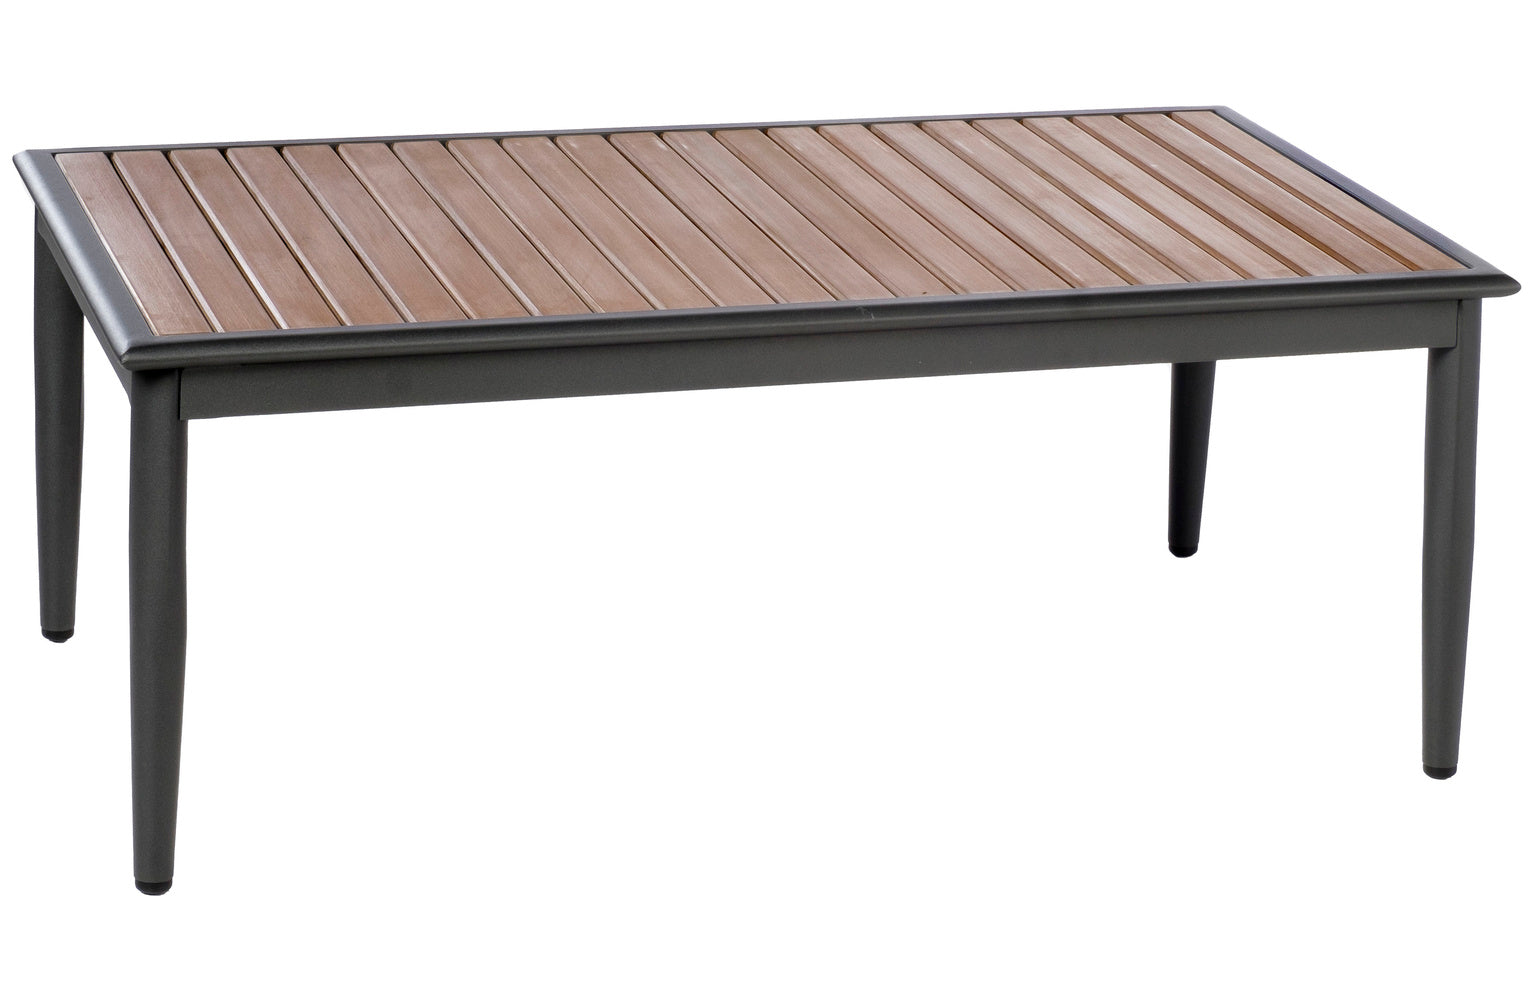 Alfresco Home Oden Polywood and Aluminum 45'' Rectangular Coffee Table